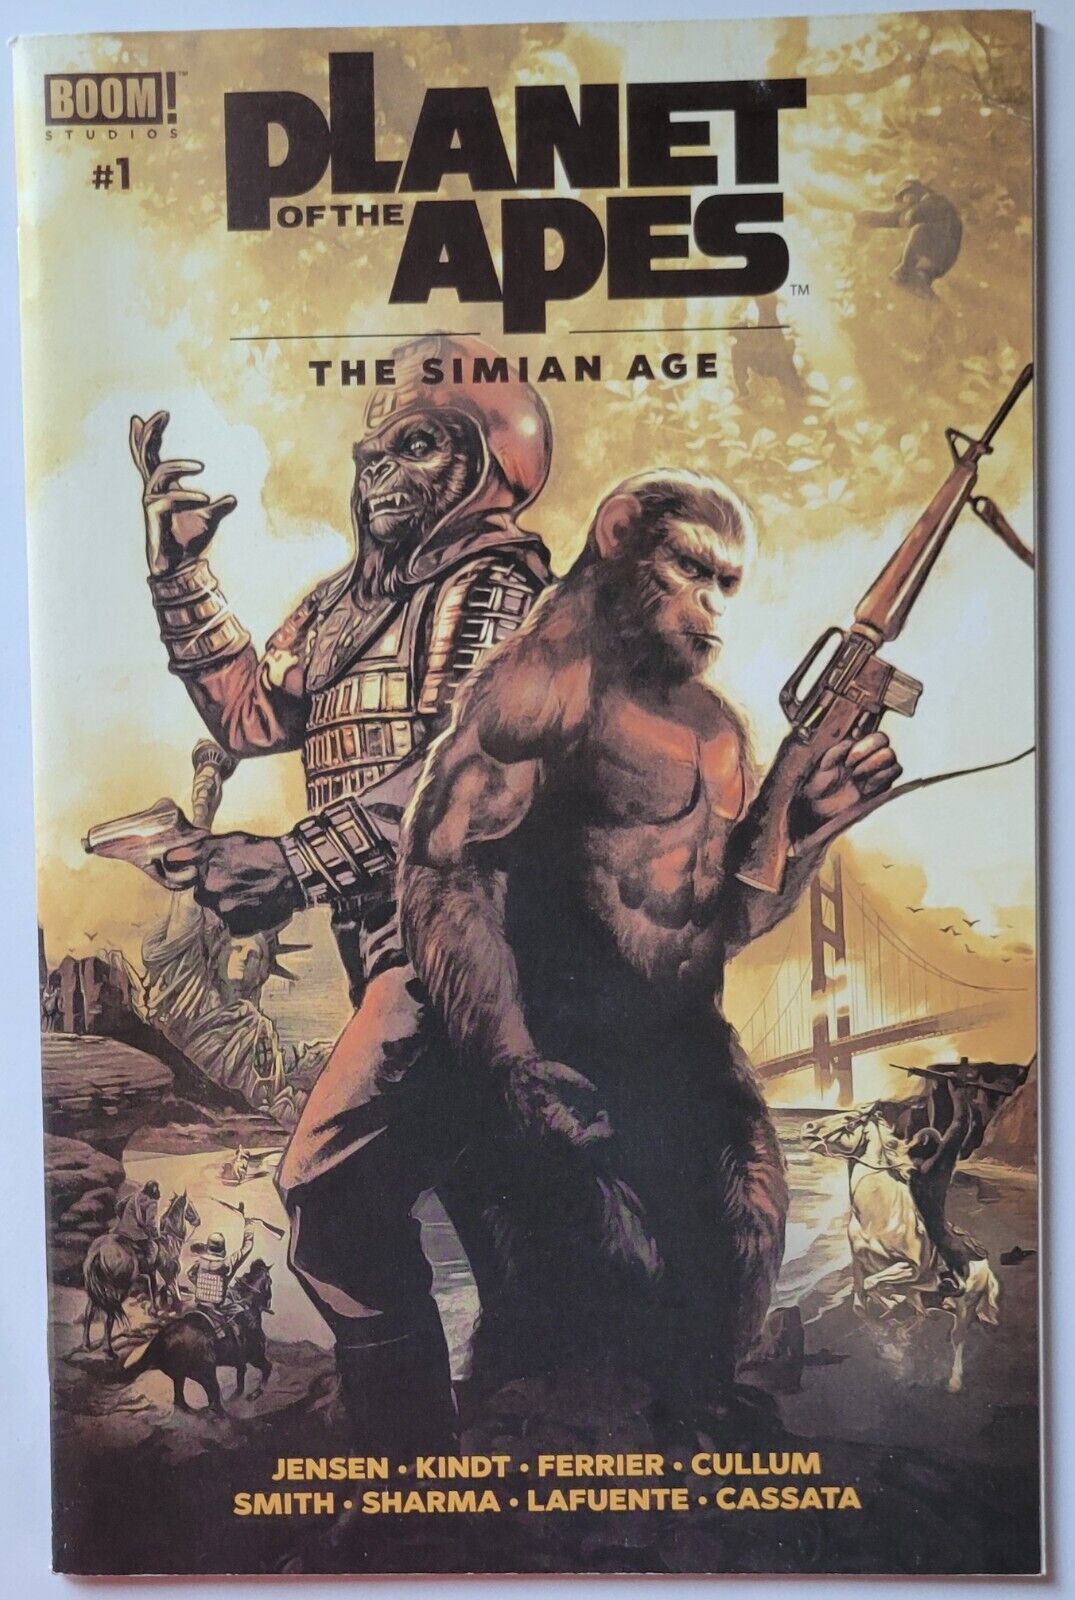 Planet of the Apes: The Simian Age #1 BOOM 2018